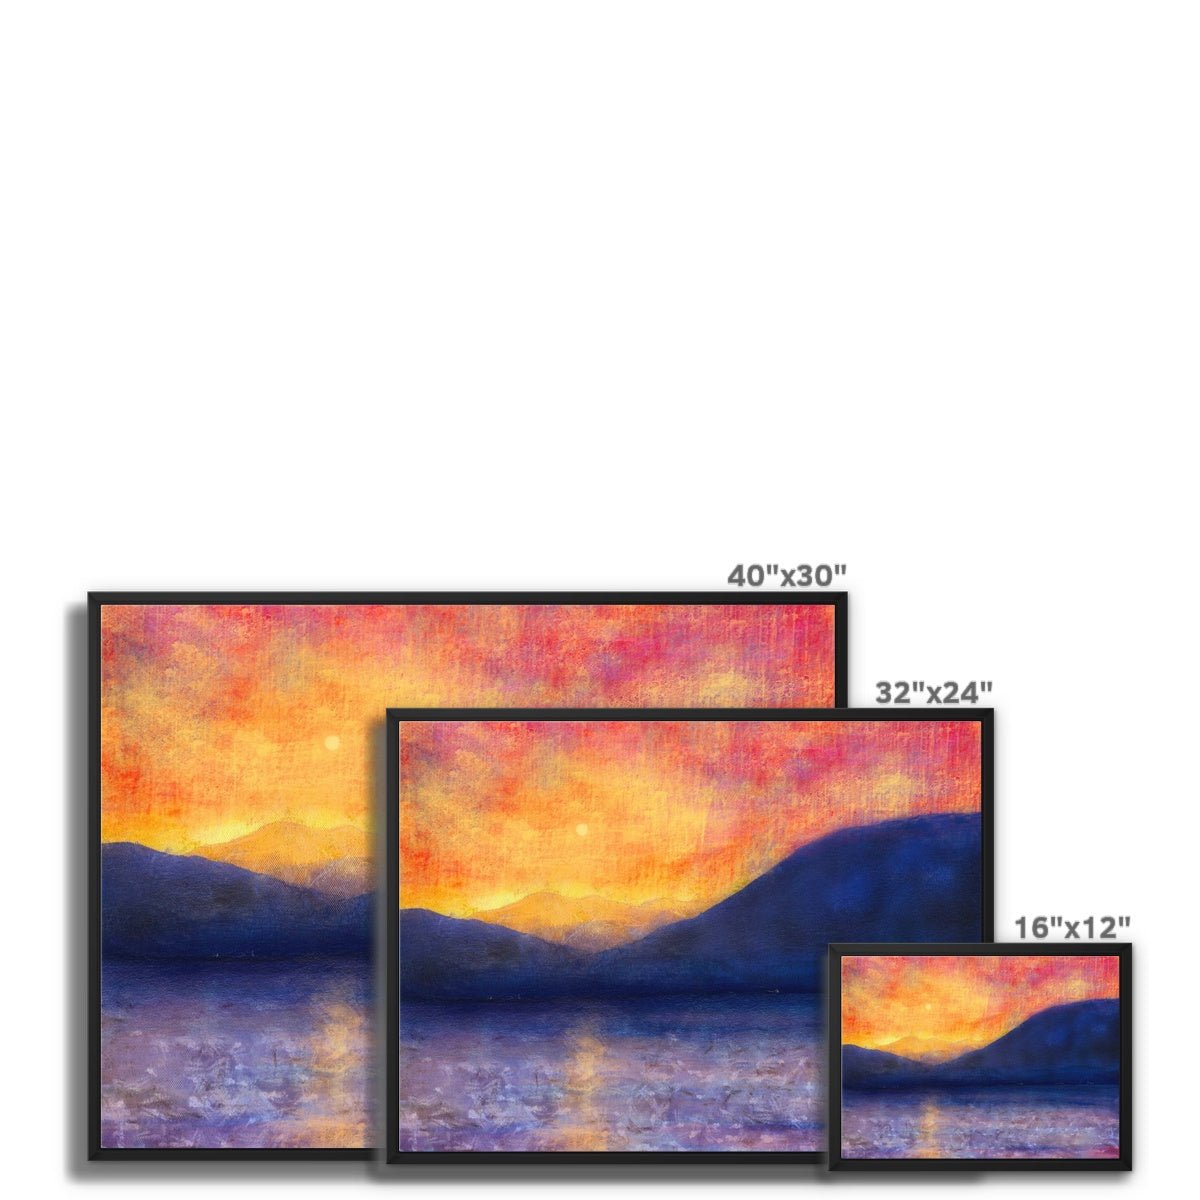 Sunset Approaching Mull Painting | Framed Canvas From Scotland-Floating Framed Canvas Prints-Hebridean Islands Art Gallery-Paintings, Prints, Homeware, Art Gifts From Scotland By Scottish Artist Kevin Hunter